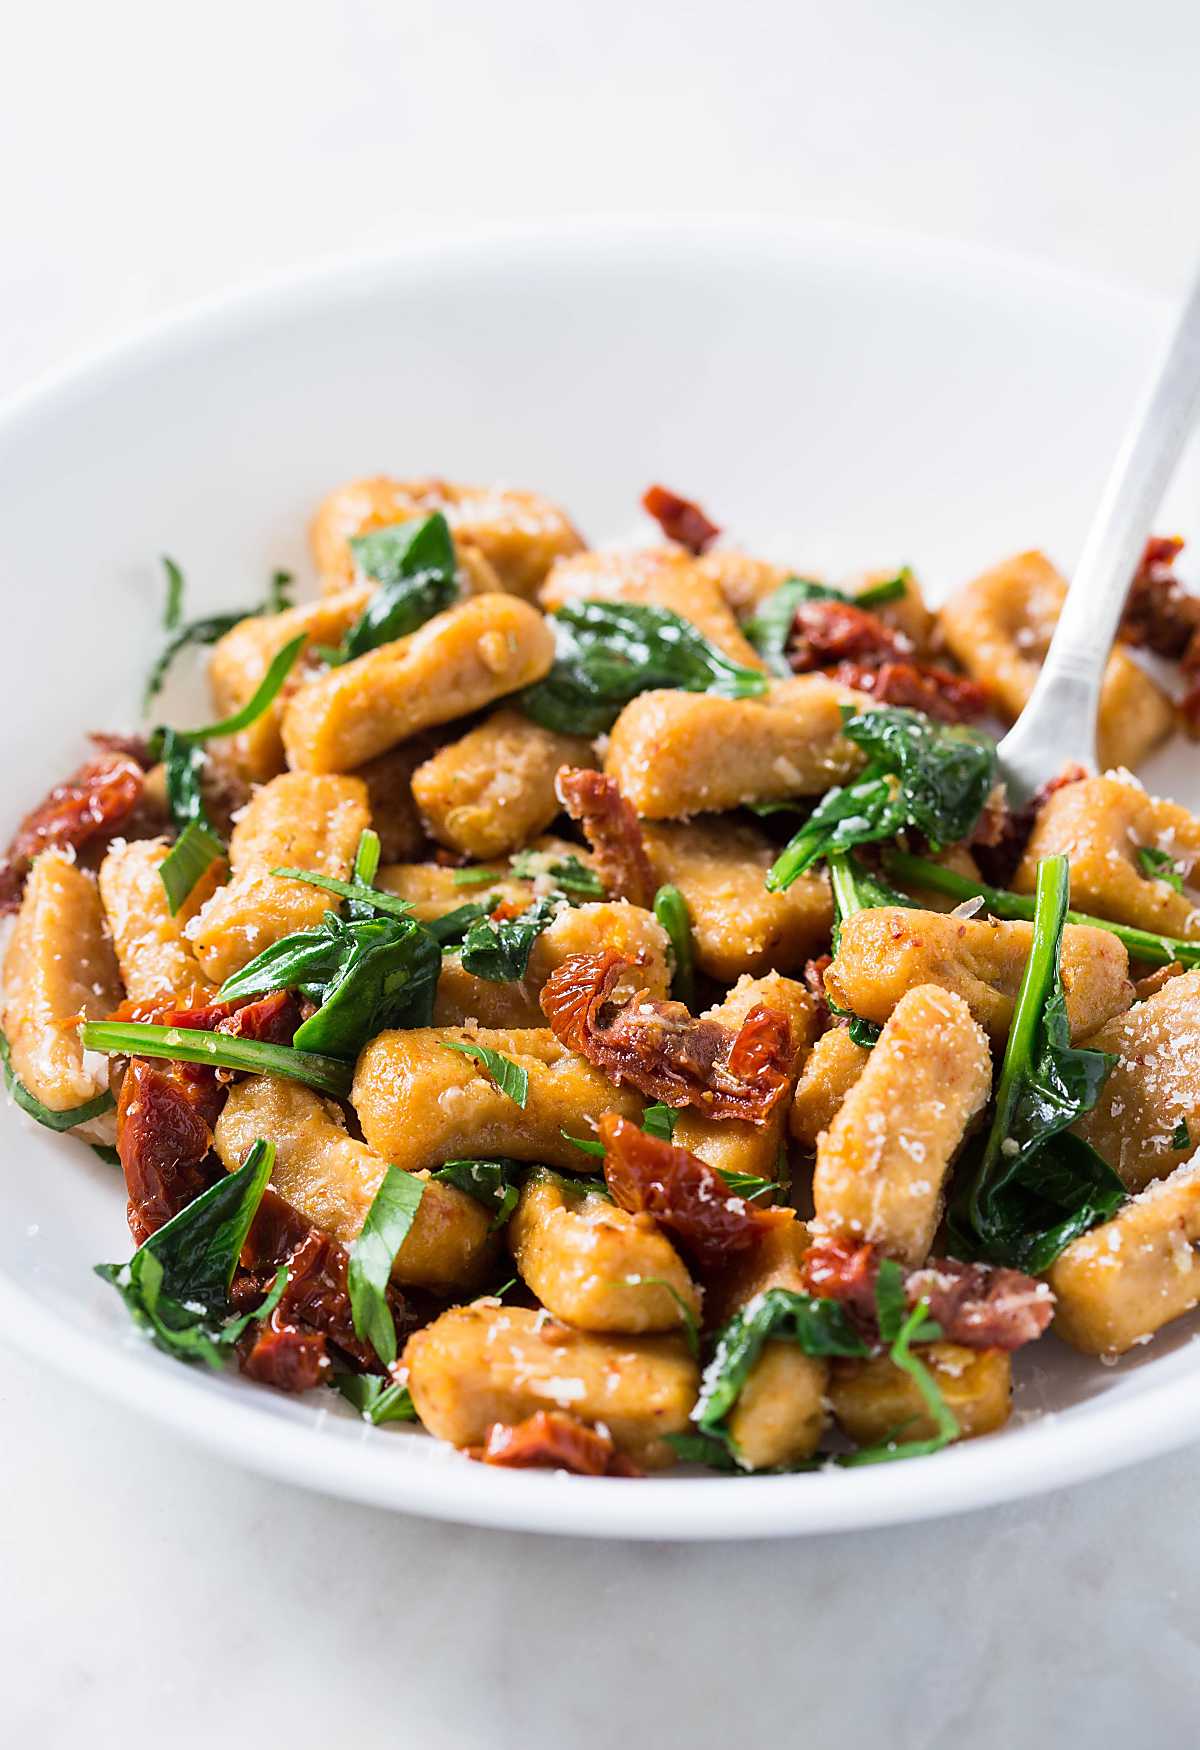 Sweet potato gnocchi with spinach and sundried tomato in a serving bowl.